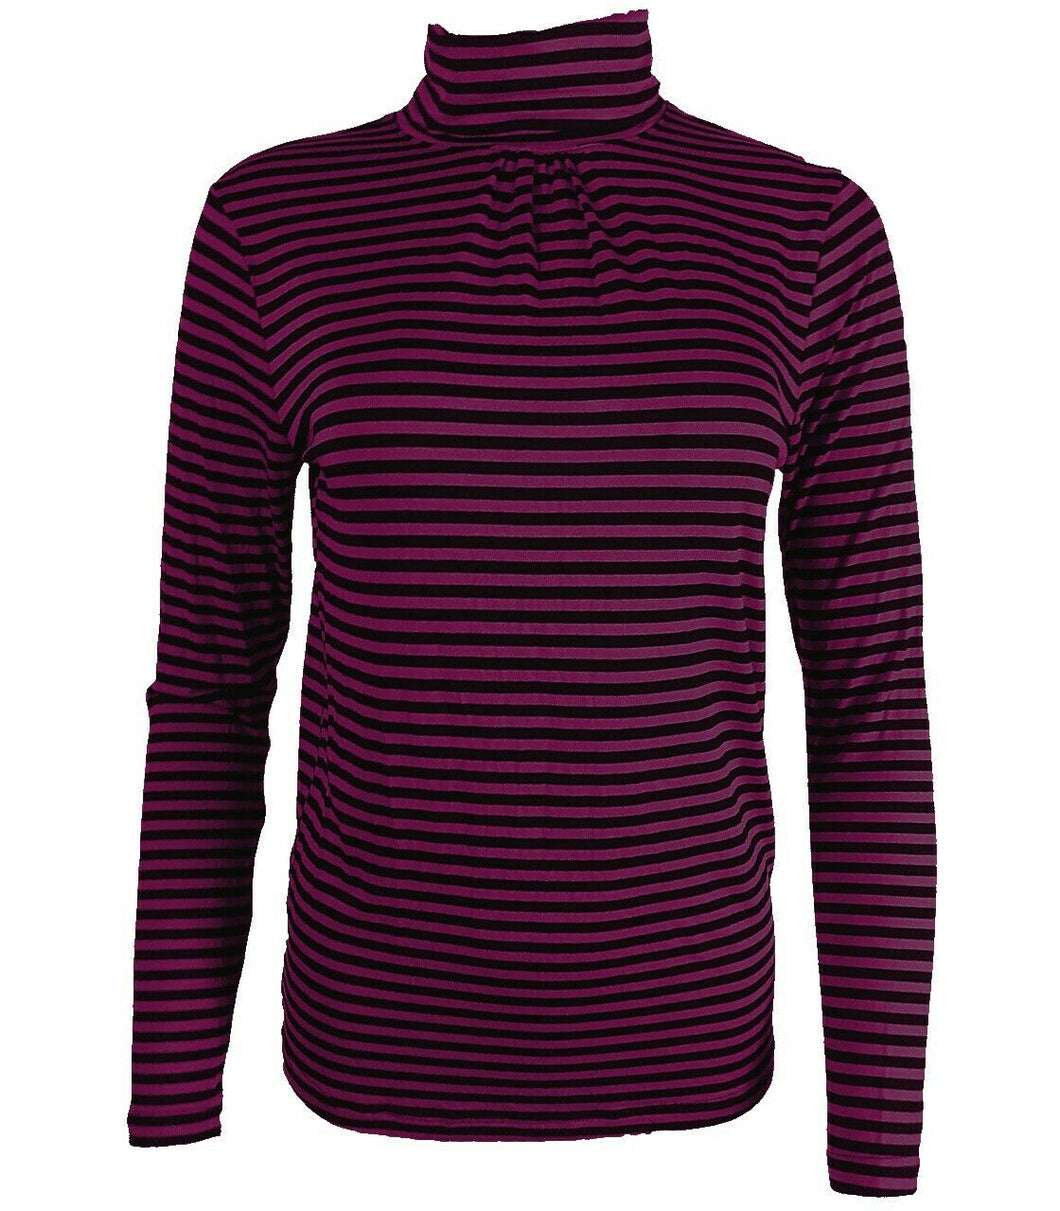 Black & Maroon Striped Long sleeve Turtle Polo Neck Top